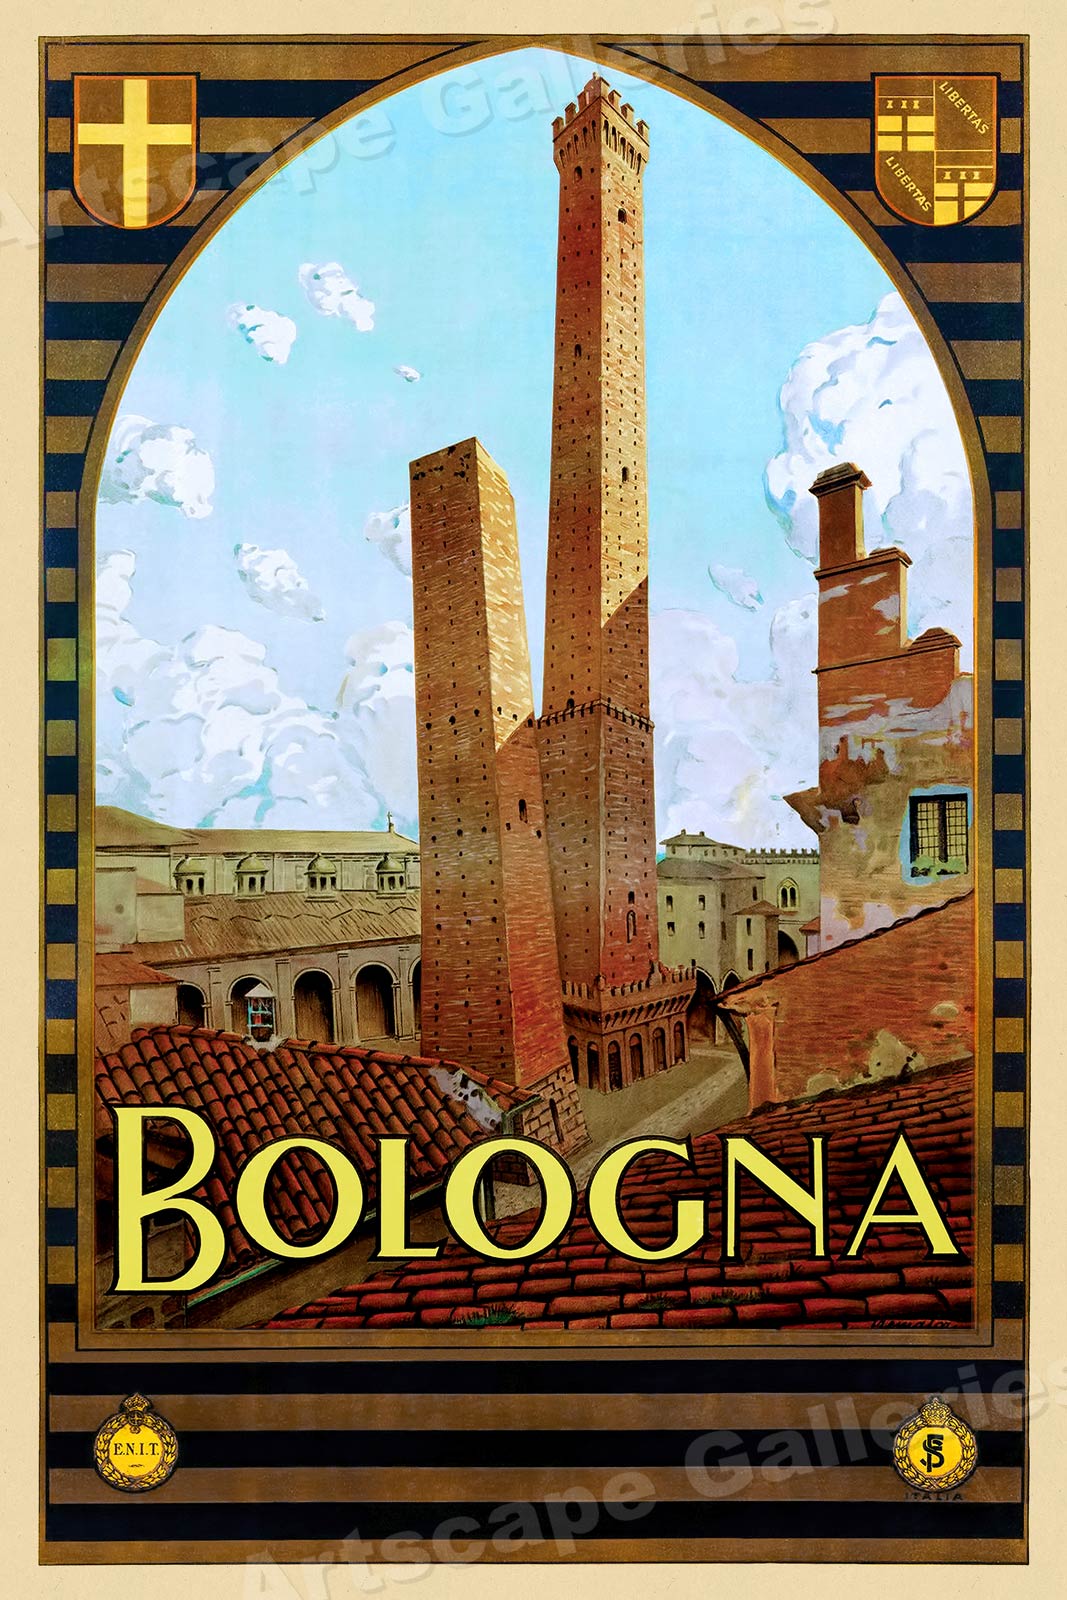 1920s “bologna Italy” Vintage Style Italian Medieval City Travel Poster